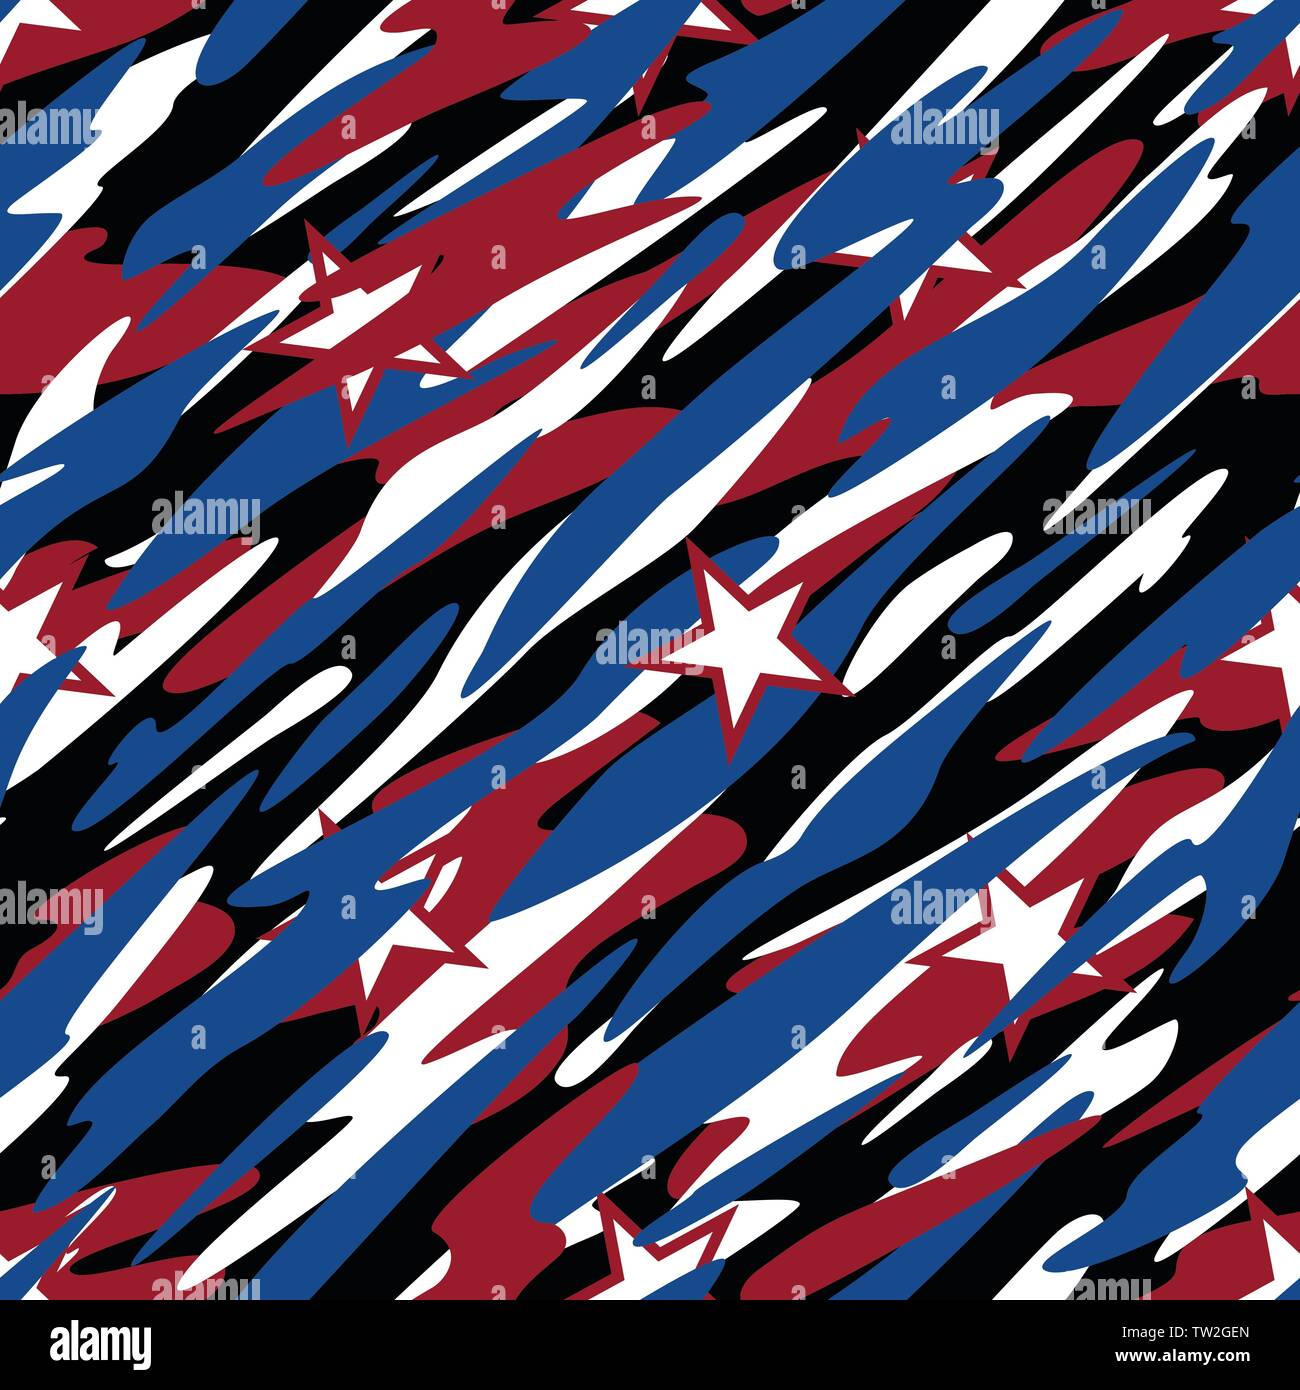 American stars and stripes seamless pattern Vector Image